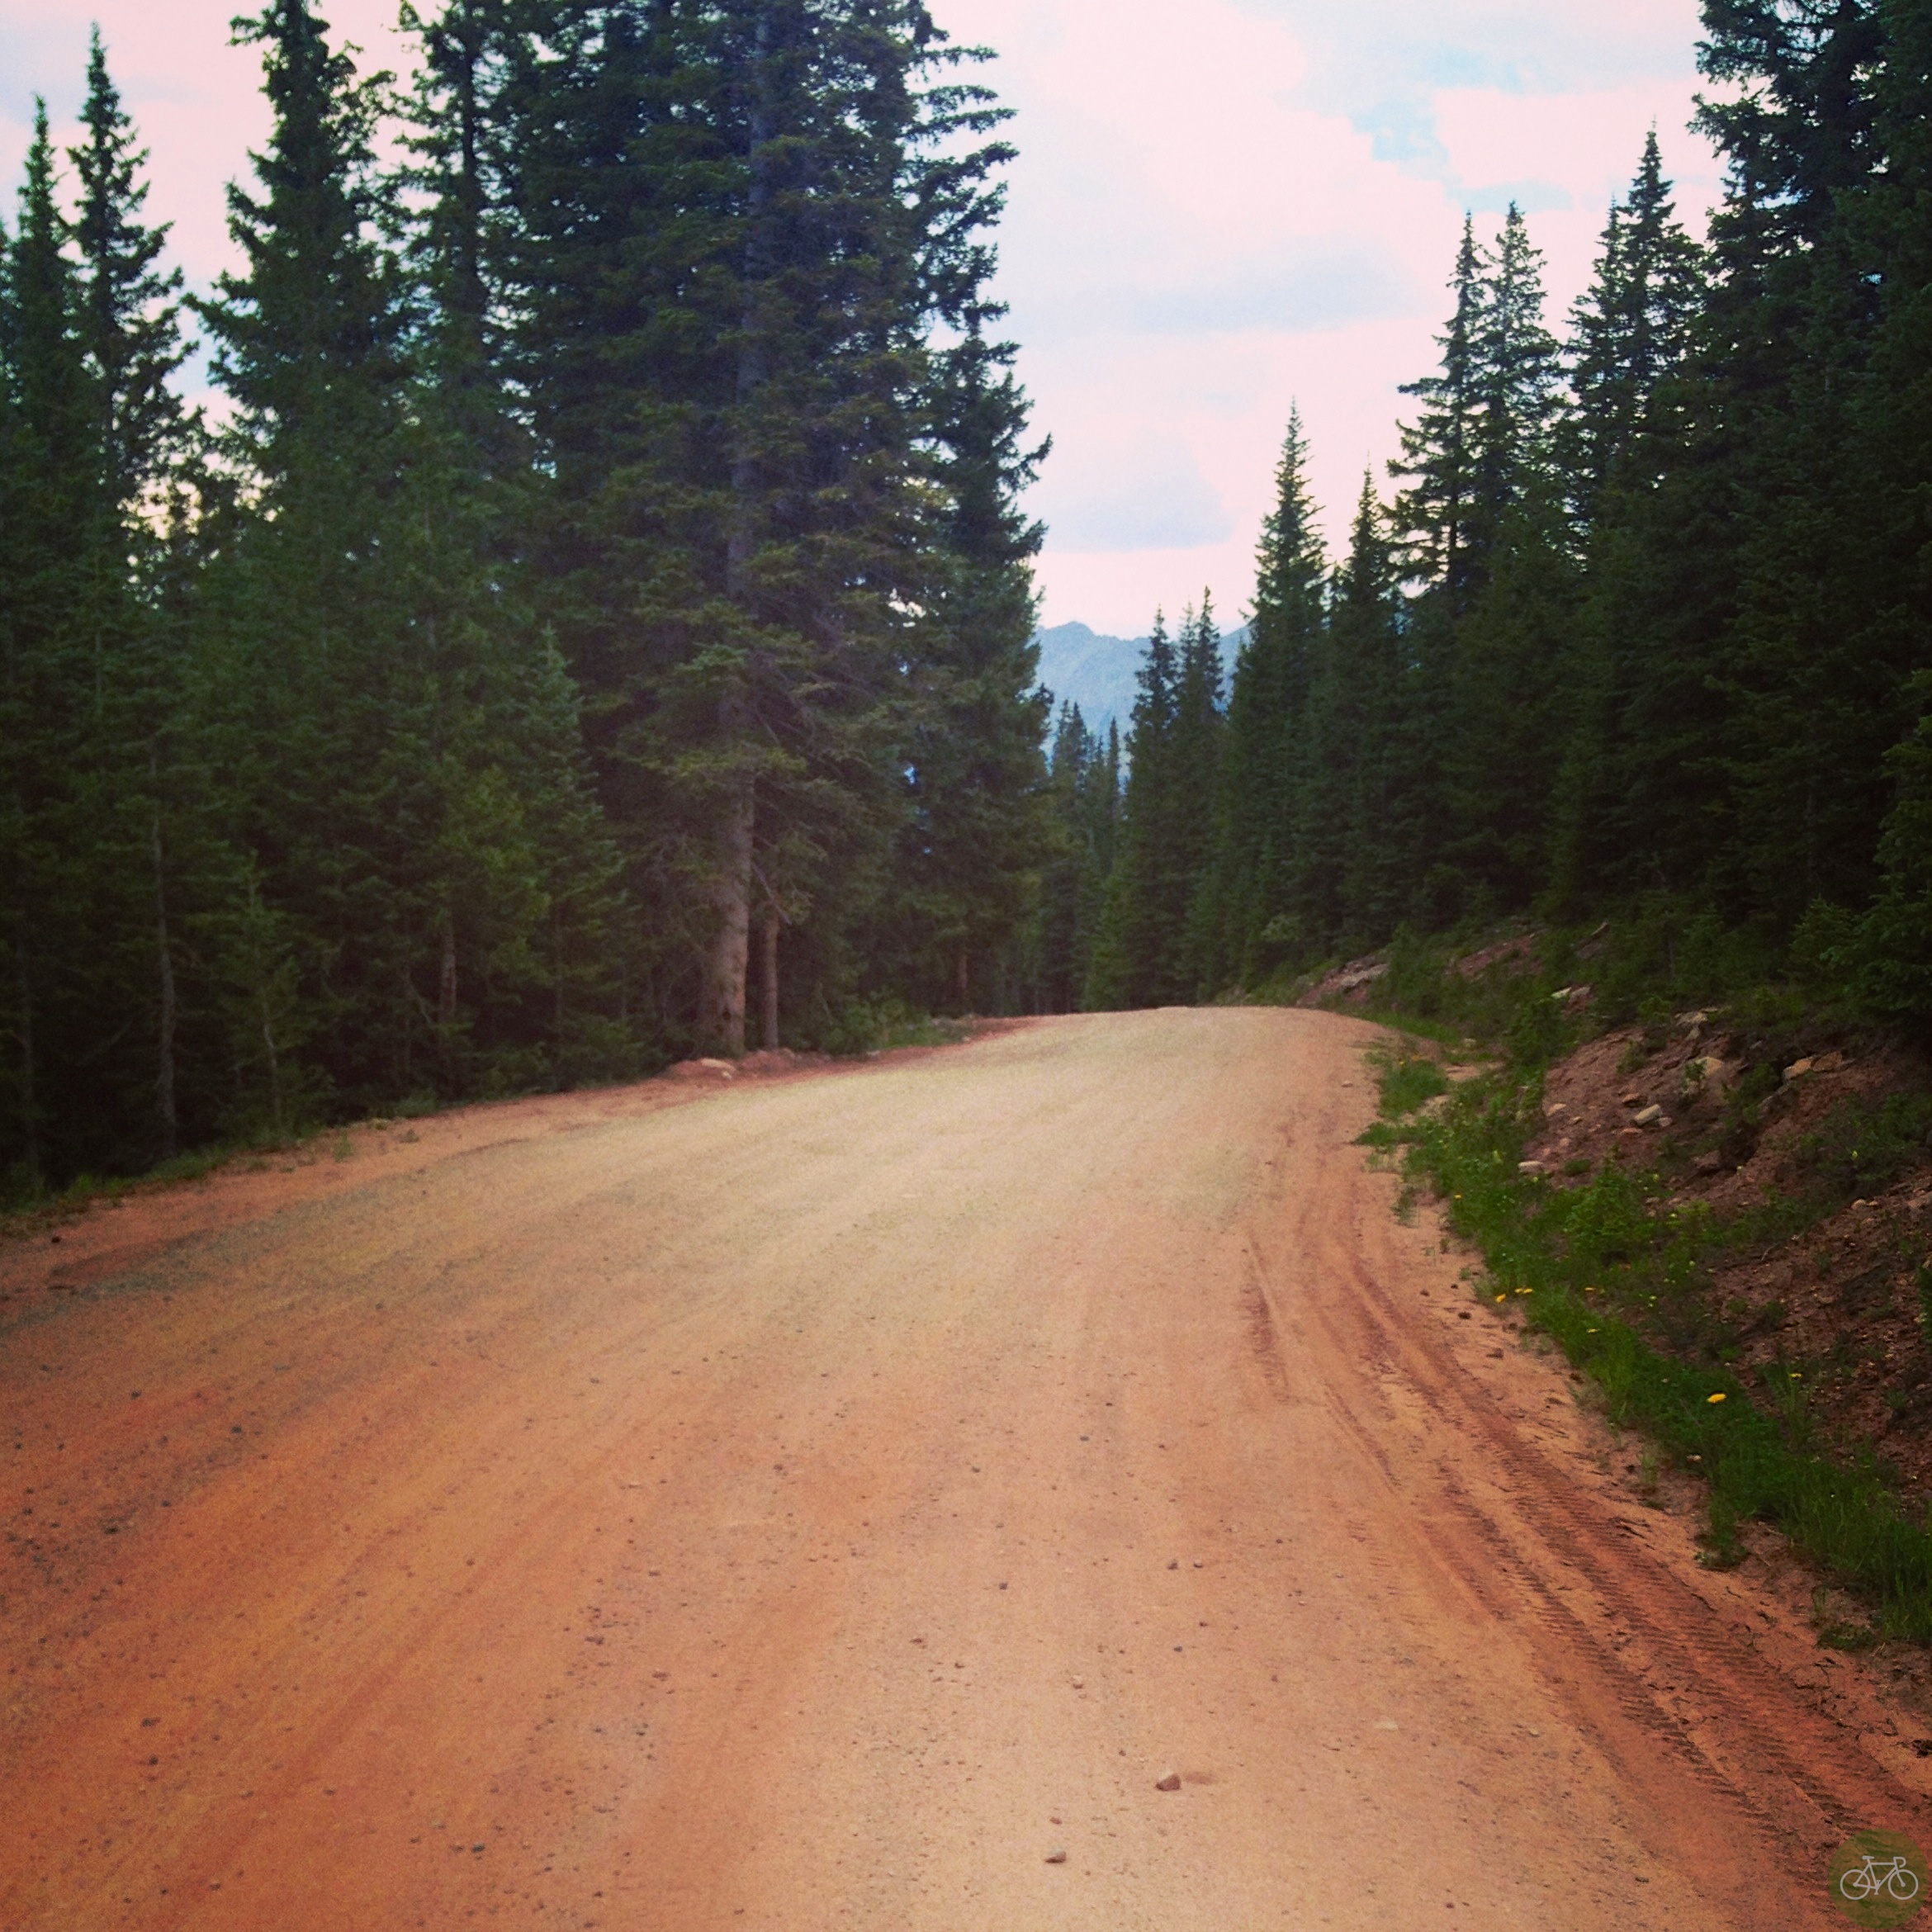 Mountain Bikes, Marmots, and Fire Roads